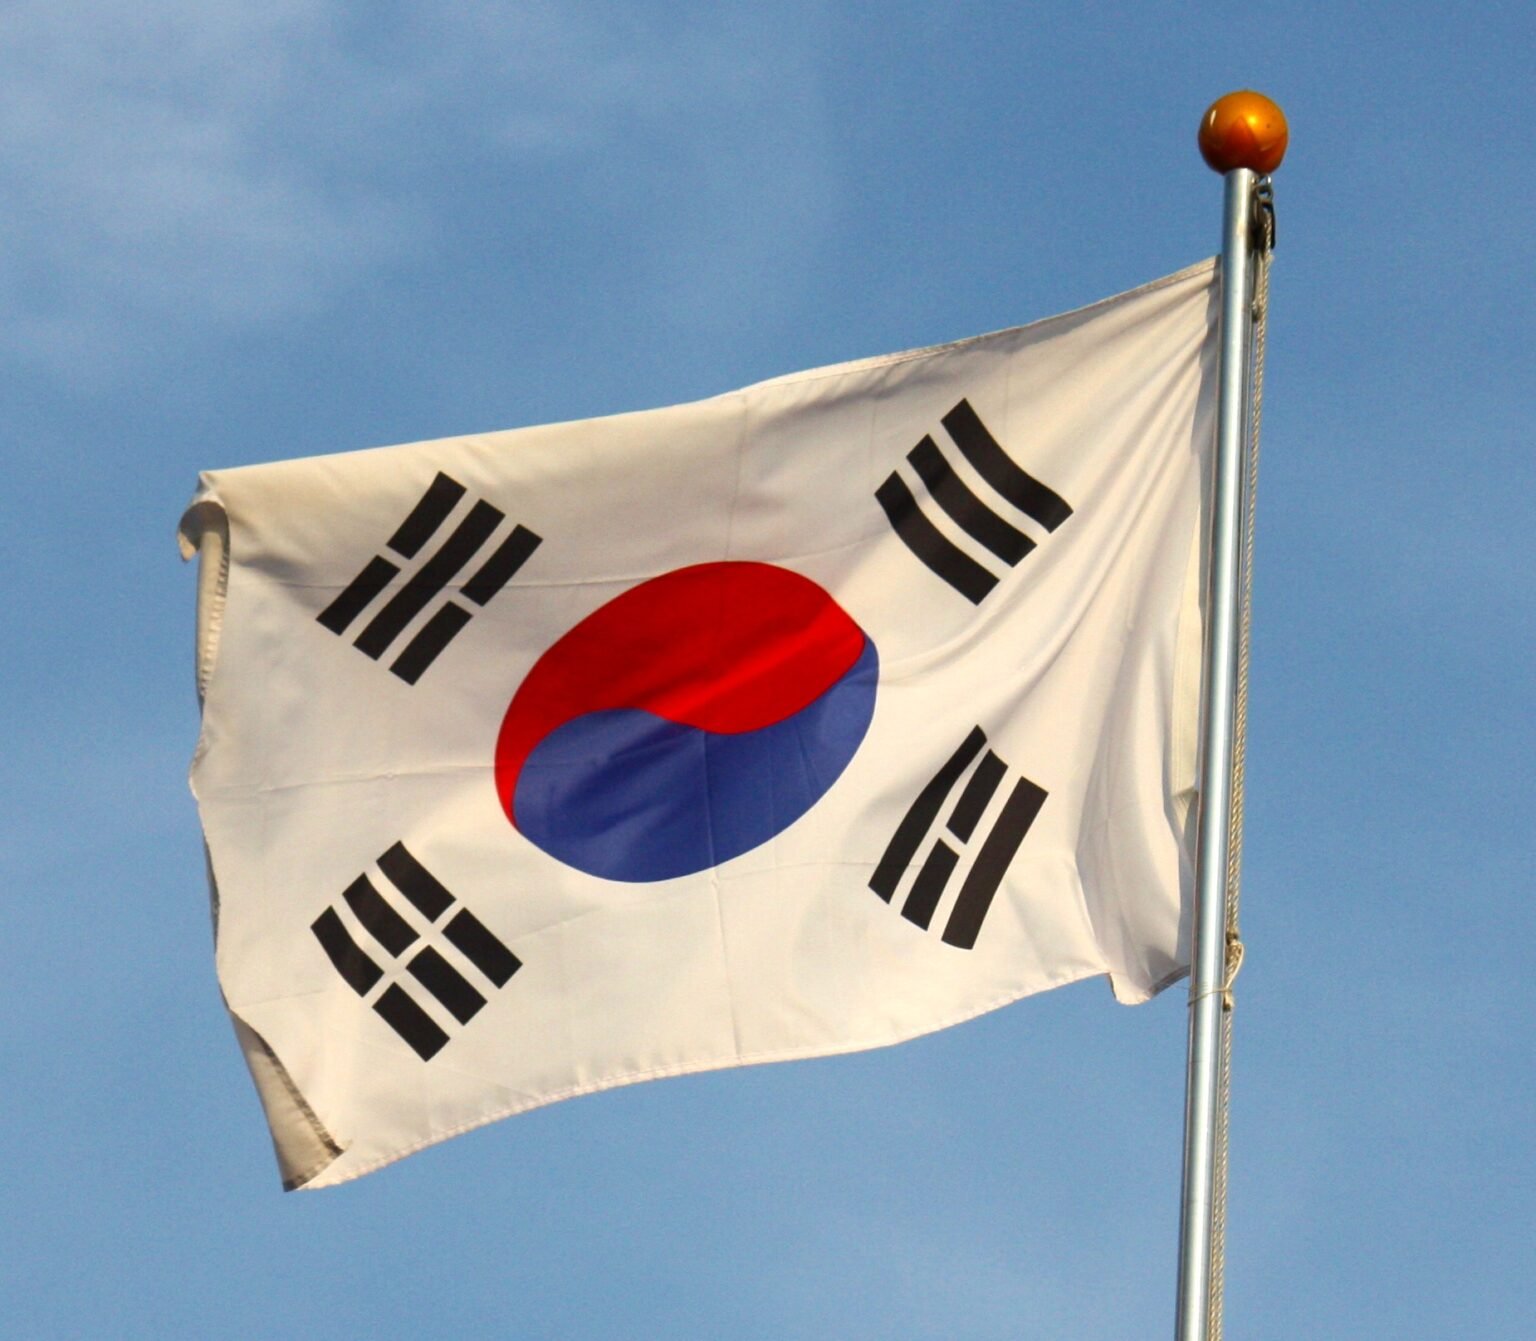 nft-issuers-face-registration-requirement-as-virtual-asset-operators-under-new-korean-law